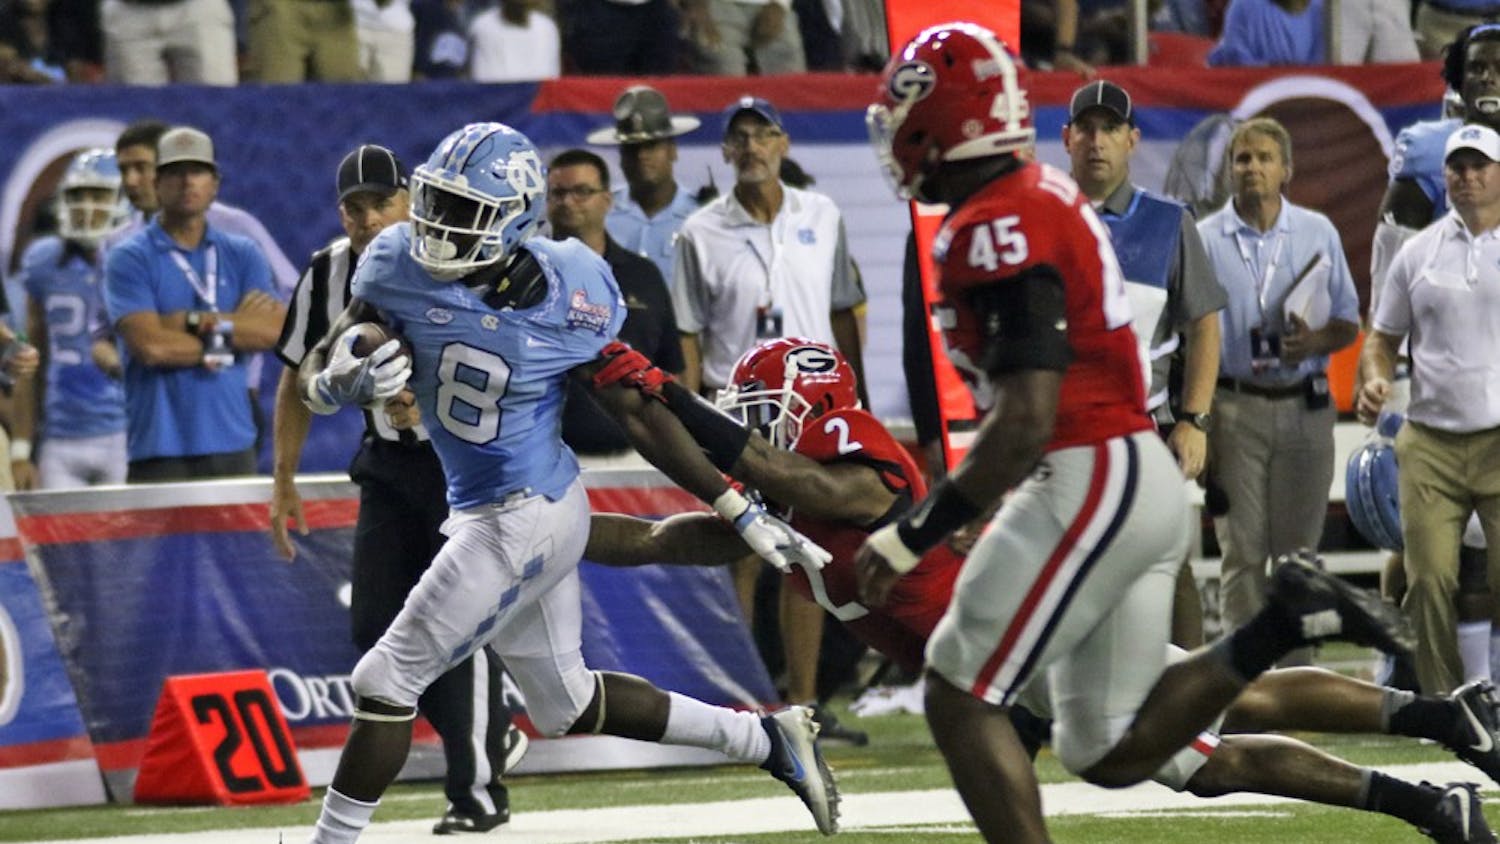 UNC running back T.J. Logan (8) sheds a tackle from Georgia defensive back Maurice Smith (2) en route to his first touch down of the day. The Tar Heels fell to the Bulldogs 33-24 on Saturday in Atlanta.